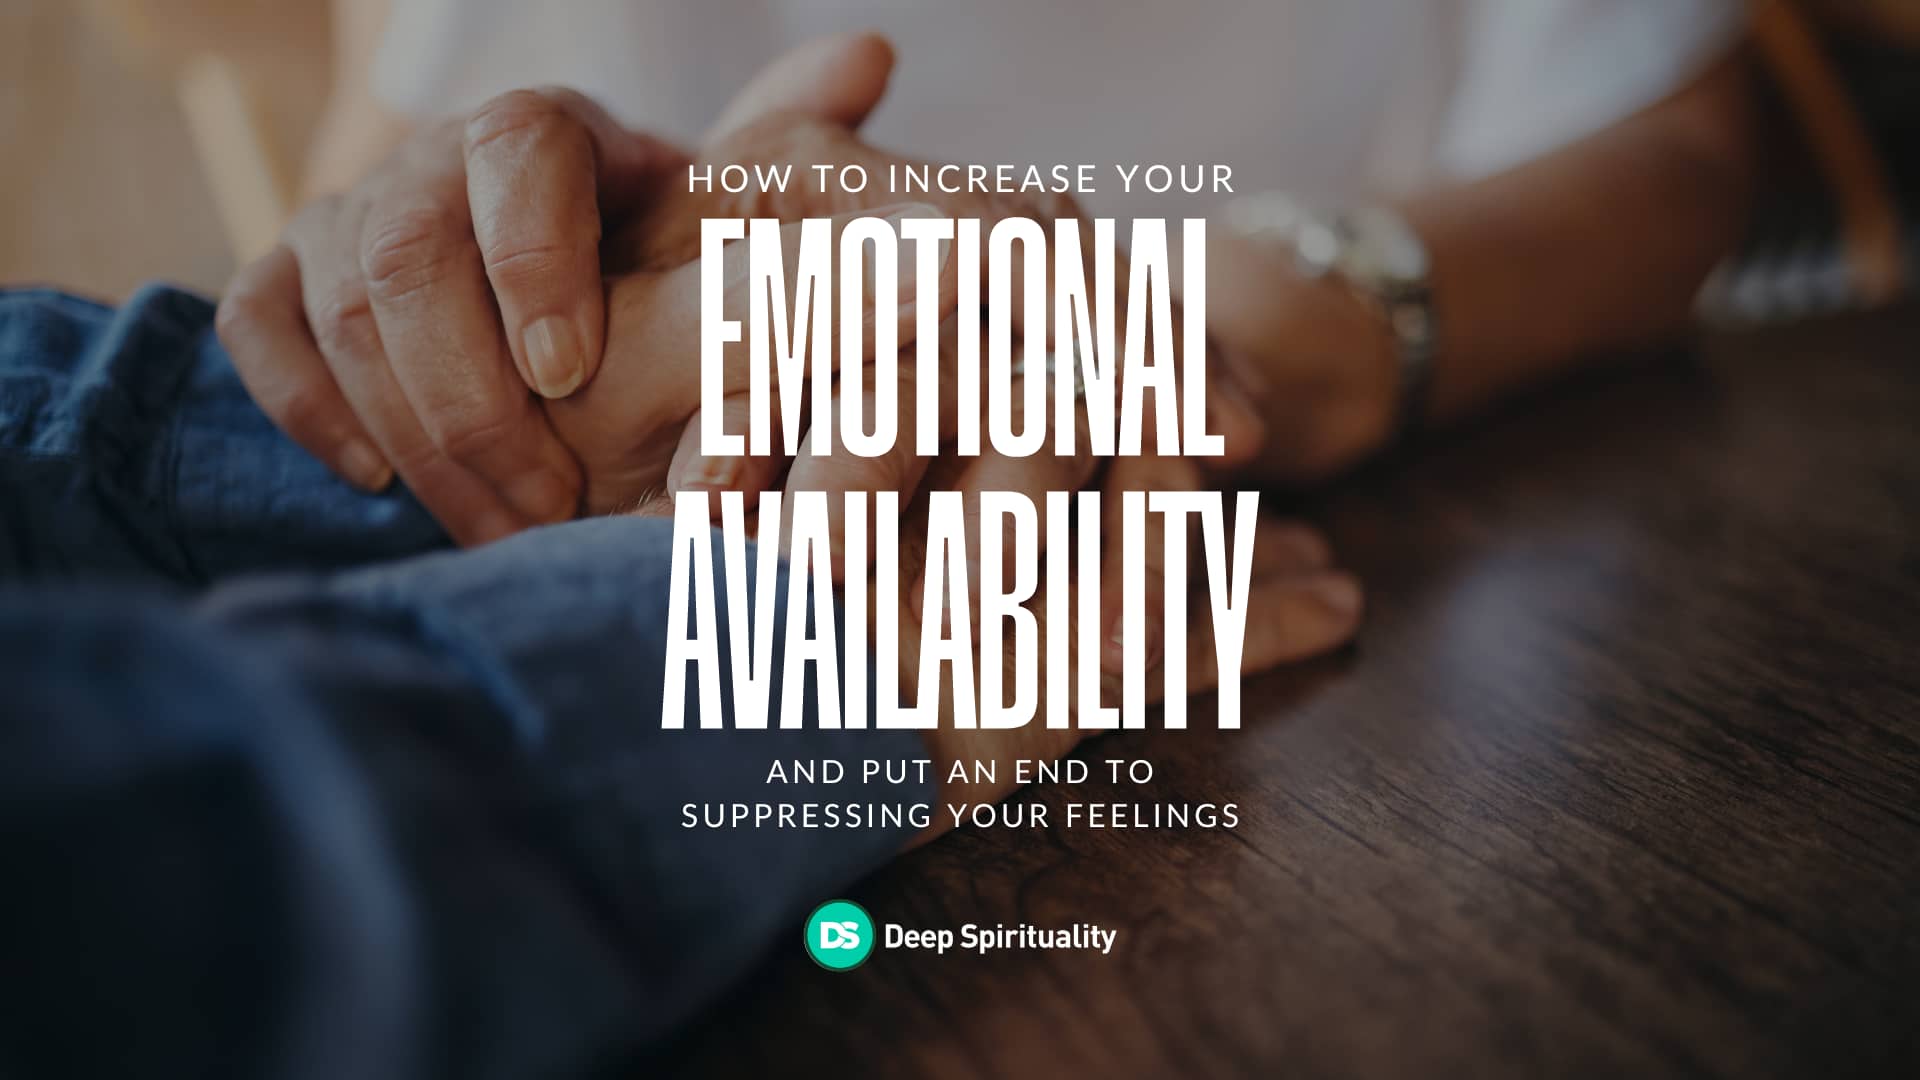 How to Increase Your Emotional Availability and Put an End to Suppressing Your Feelings 1